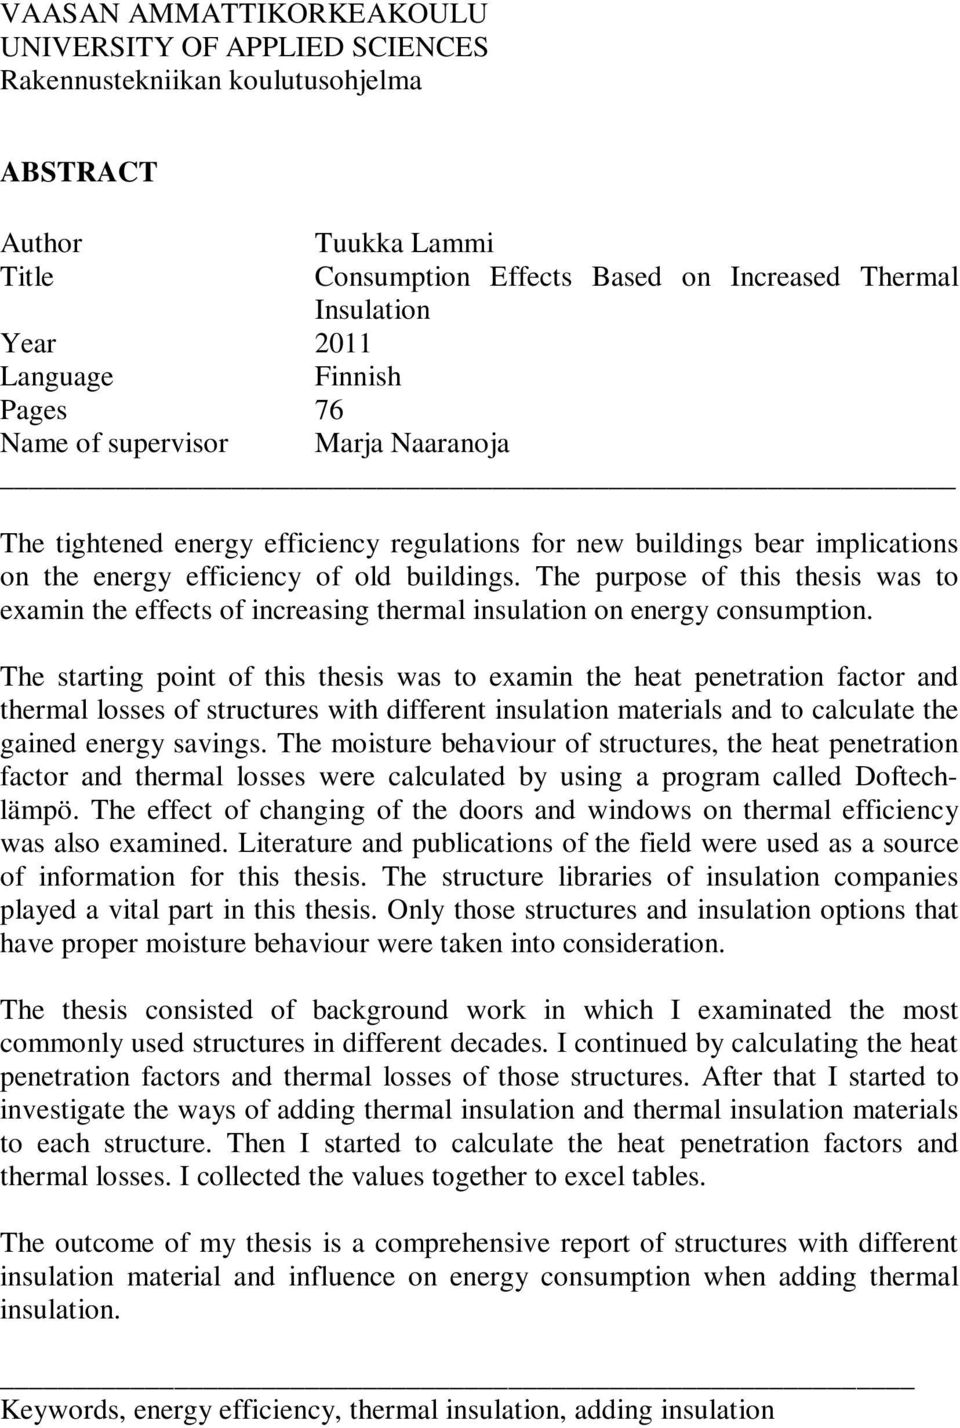 The purpose of this thesis was to examin the effects of increasing thermal insulation on energy consumption.